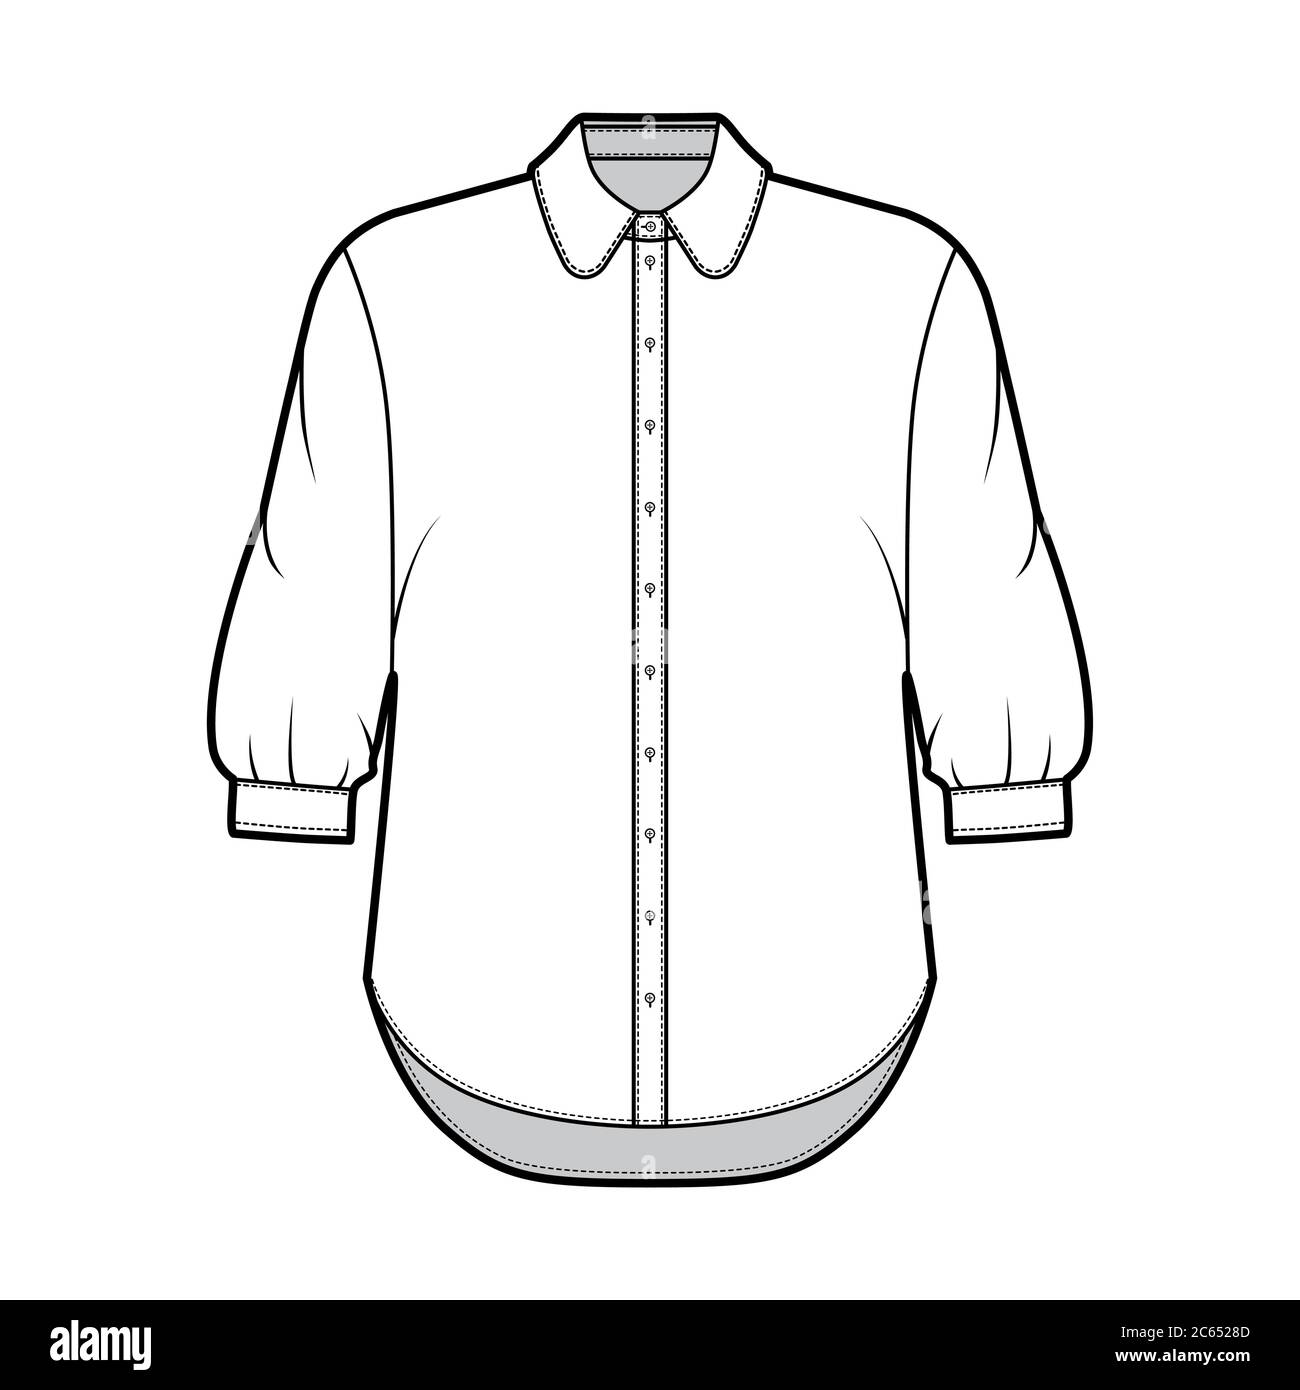 Classic shirt technical fashion illustration with button down front ...